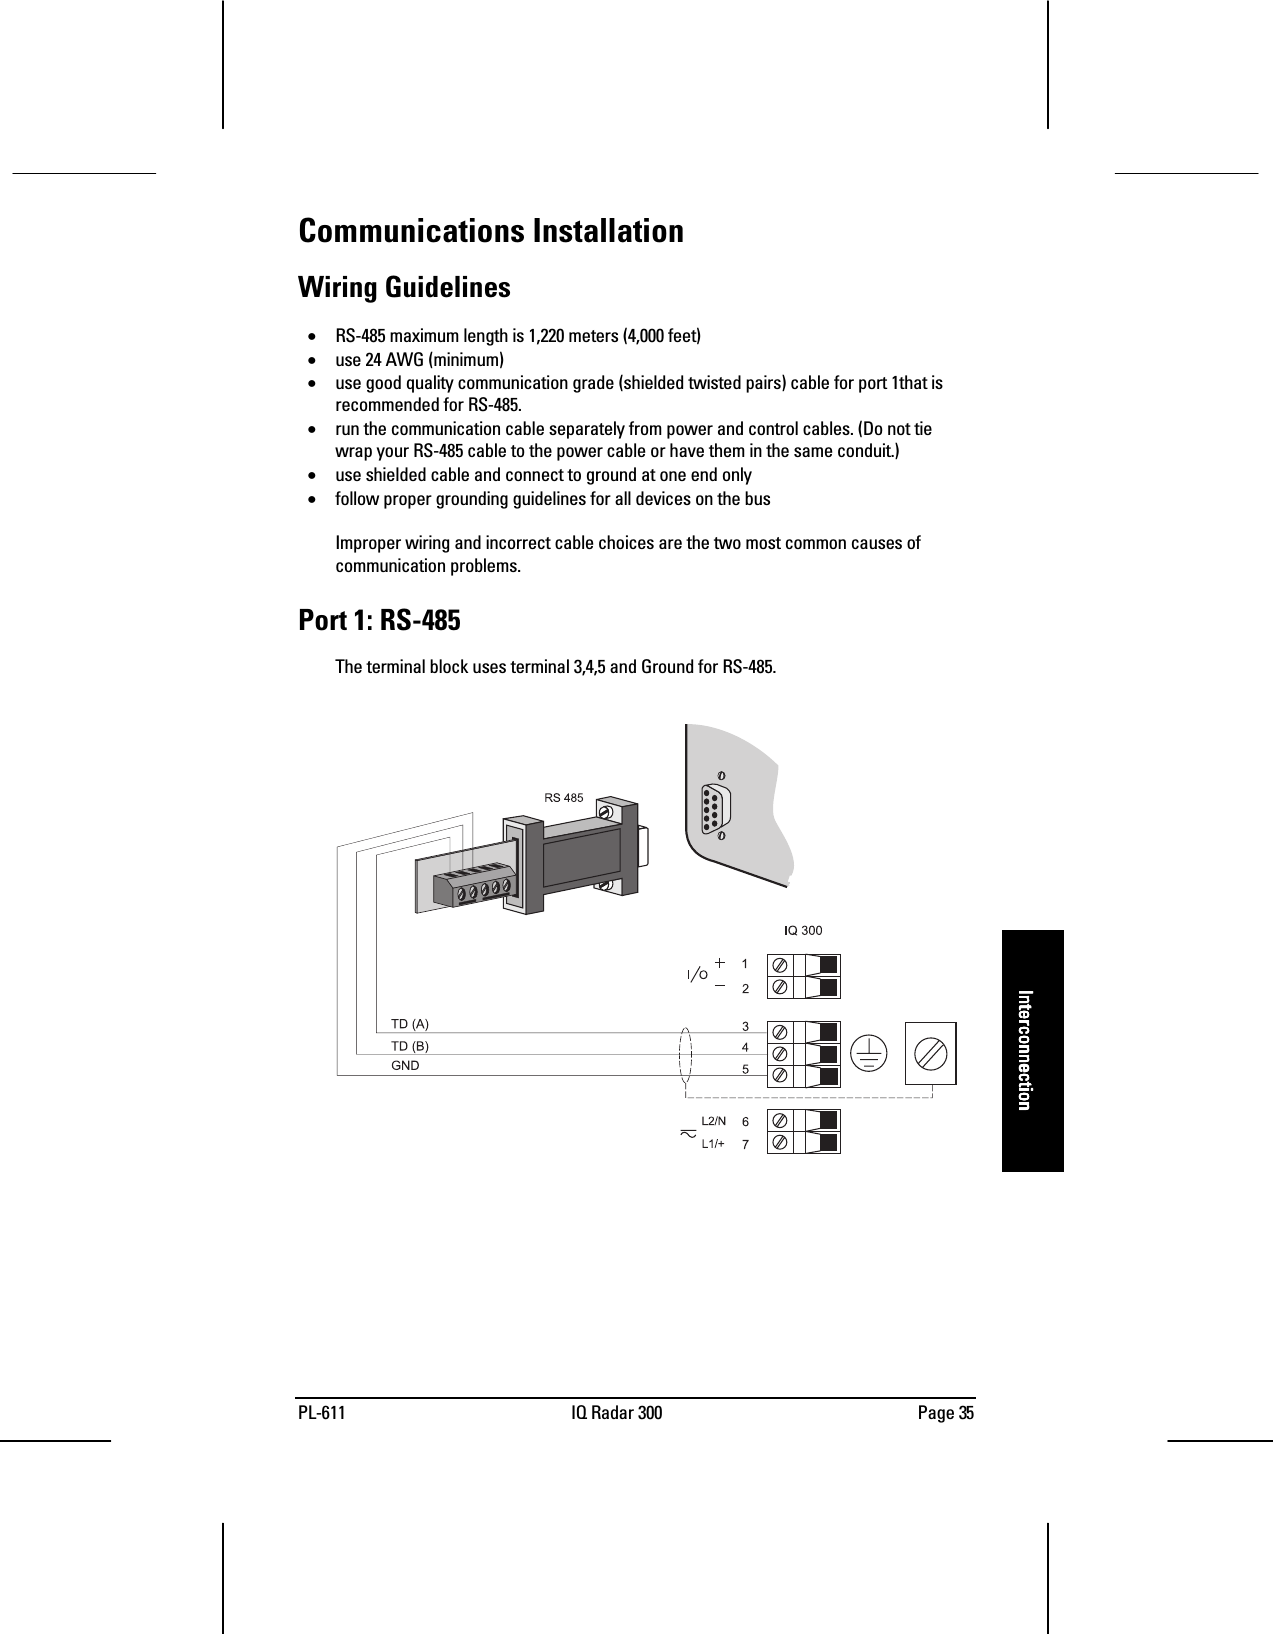 PL-611 IQ Radar 300 Page 35InterconnectionInterconnectionInterconnectionInterconnectionCommunications InstallationWiring Guidelines• RS-485 maximum length is 1,220 meters (4,000 feet)• use 24 AWG (minimum)• use good quality communication grade (shielded twisted pairs) cable for port 1that isrecommended for RS-485.• run the communication cable separately from power and control cables. (Do not tiewrap your RS-485 cable to the power cable or have them in the same conduit.)• use shielded cable and connect to ground at one end only• follow proper grounding guidelines for all devices on the busImproper wiring and incorrect cable choices are the two most common causes ofcommunication problems.Port 1: RS-485The terminal block uses terminal 3,4,5 and Ground for RS-485.